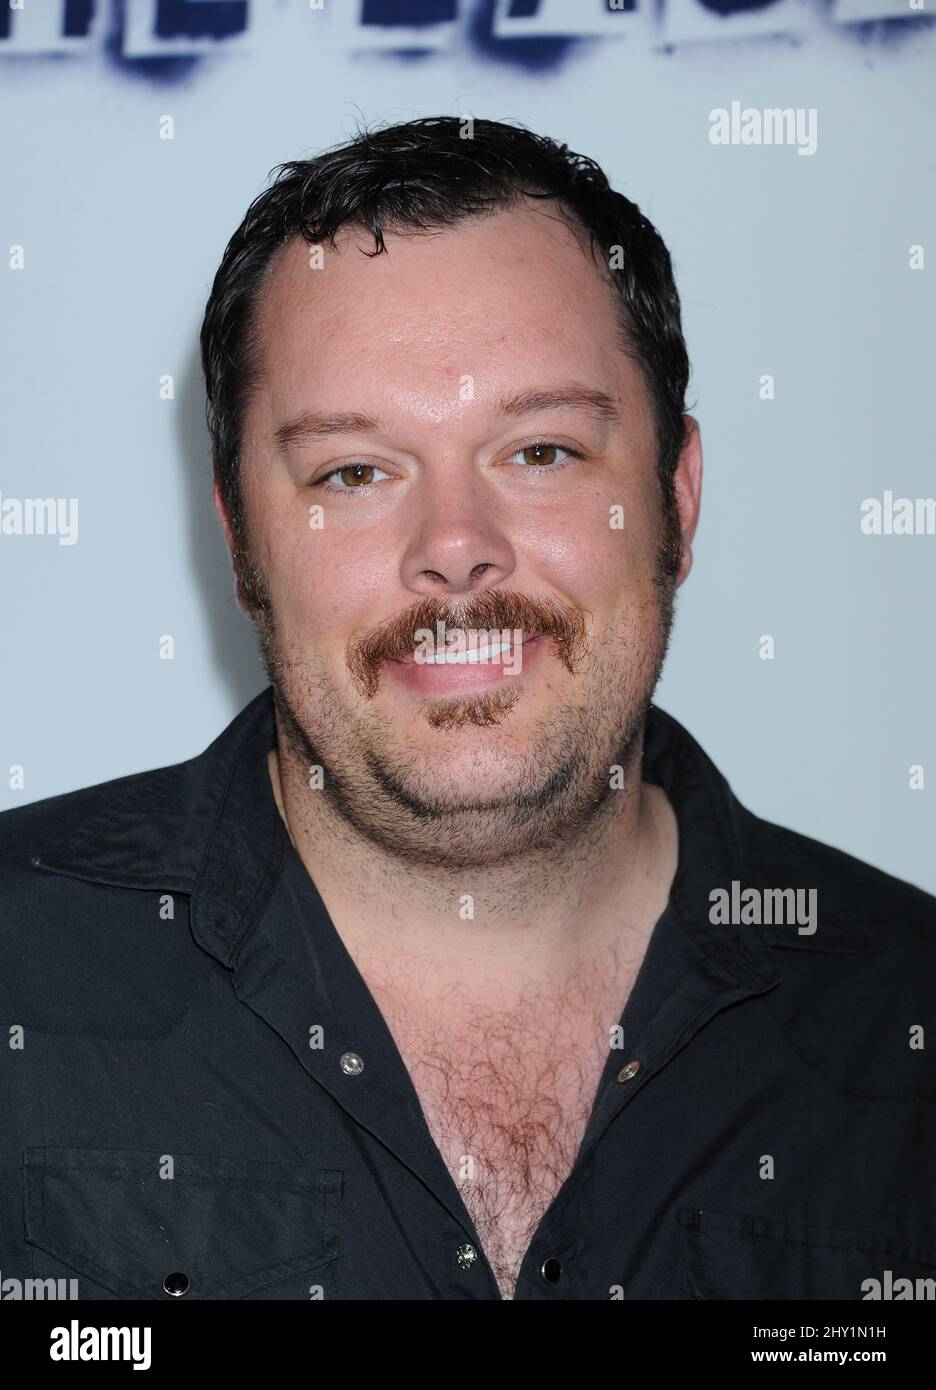 Michael Gladis attending the premiere of "The East" in Los Angeles, California. Stock Photo